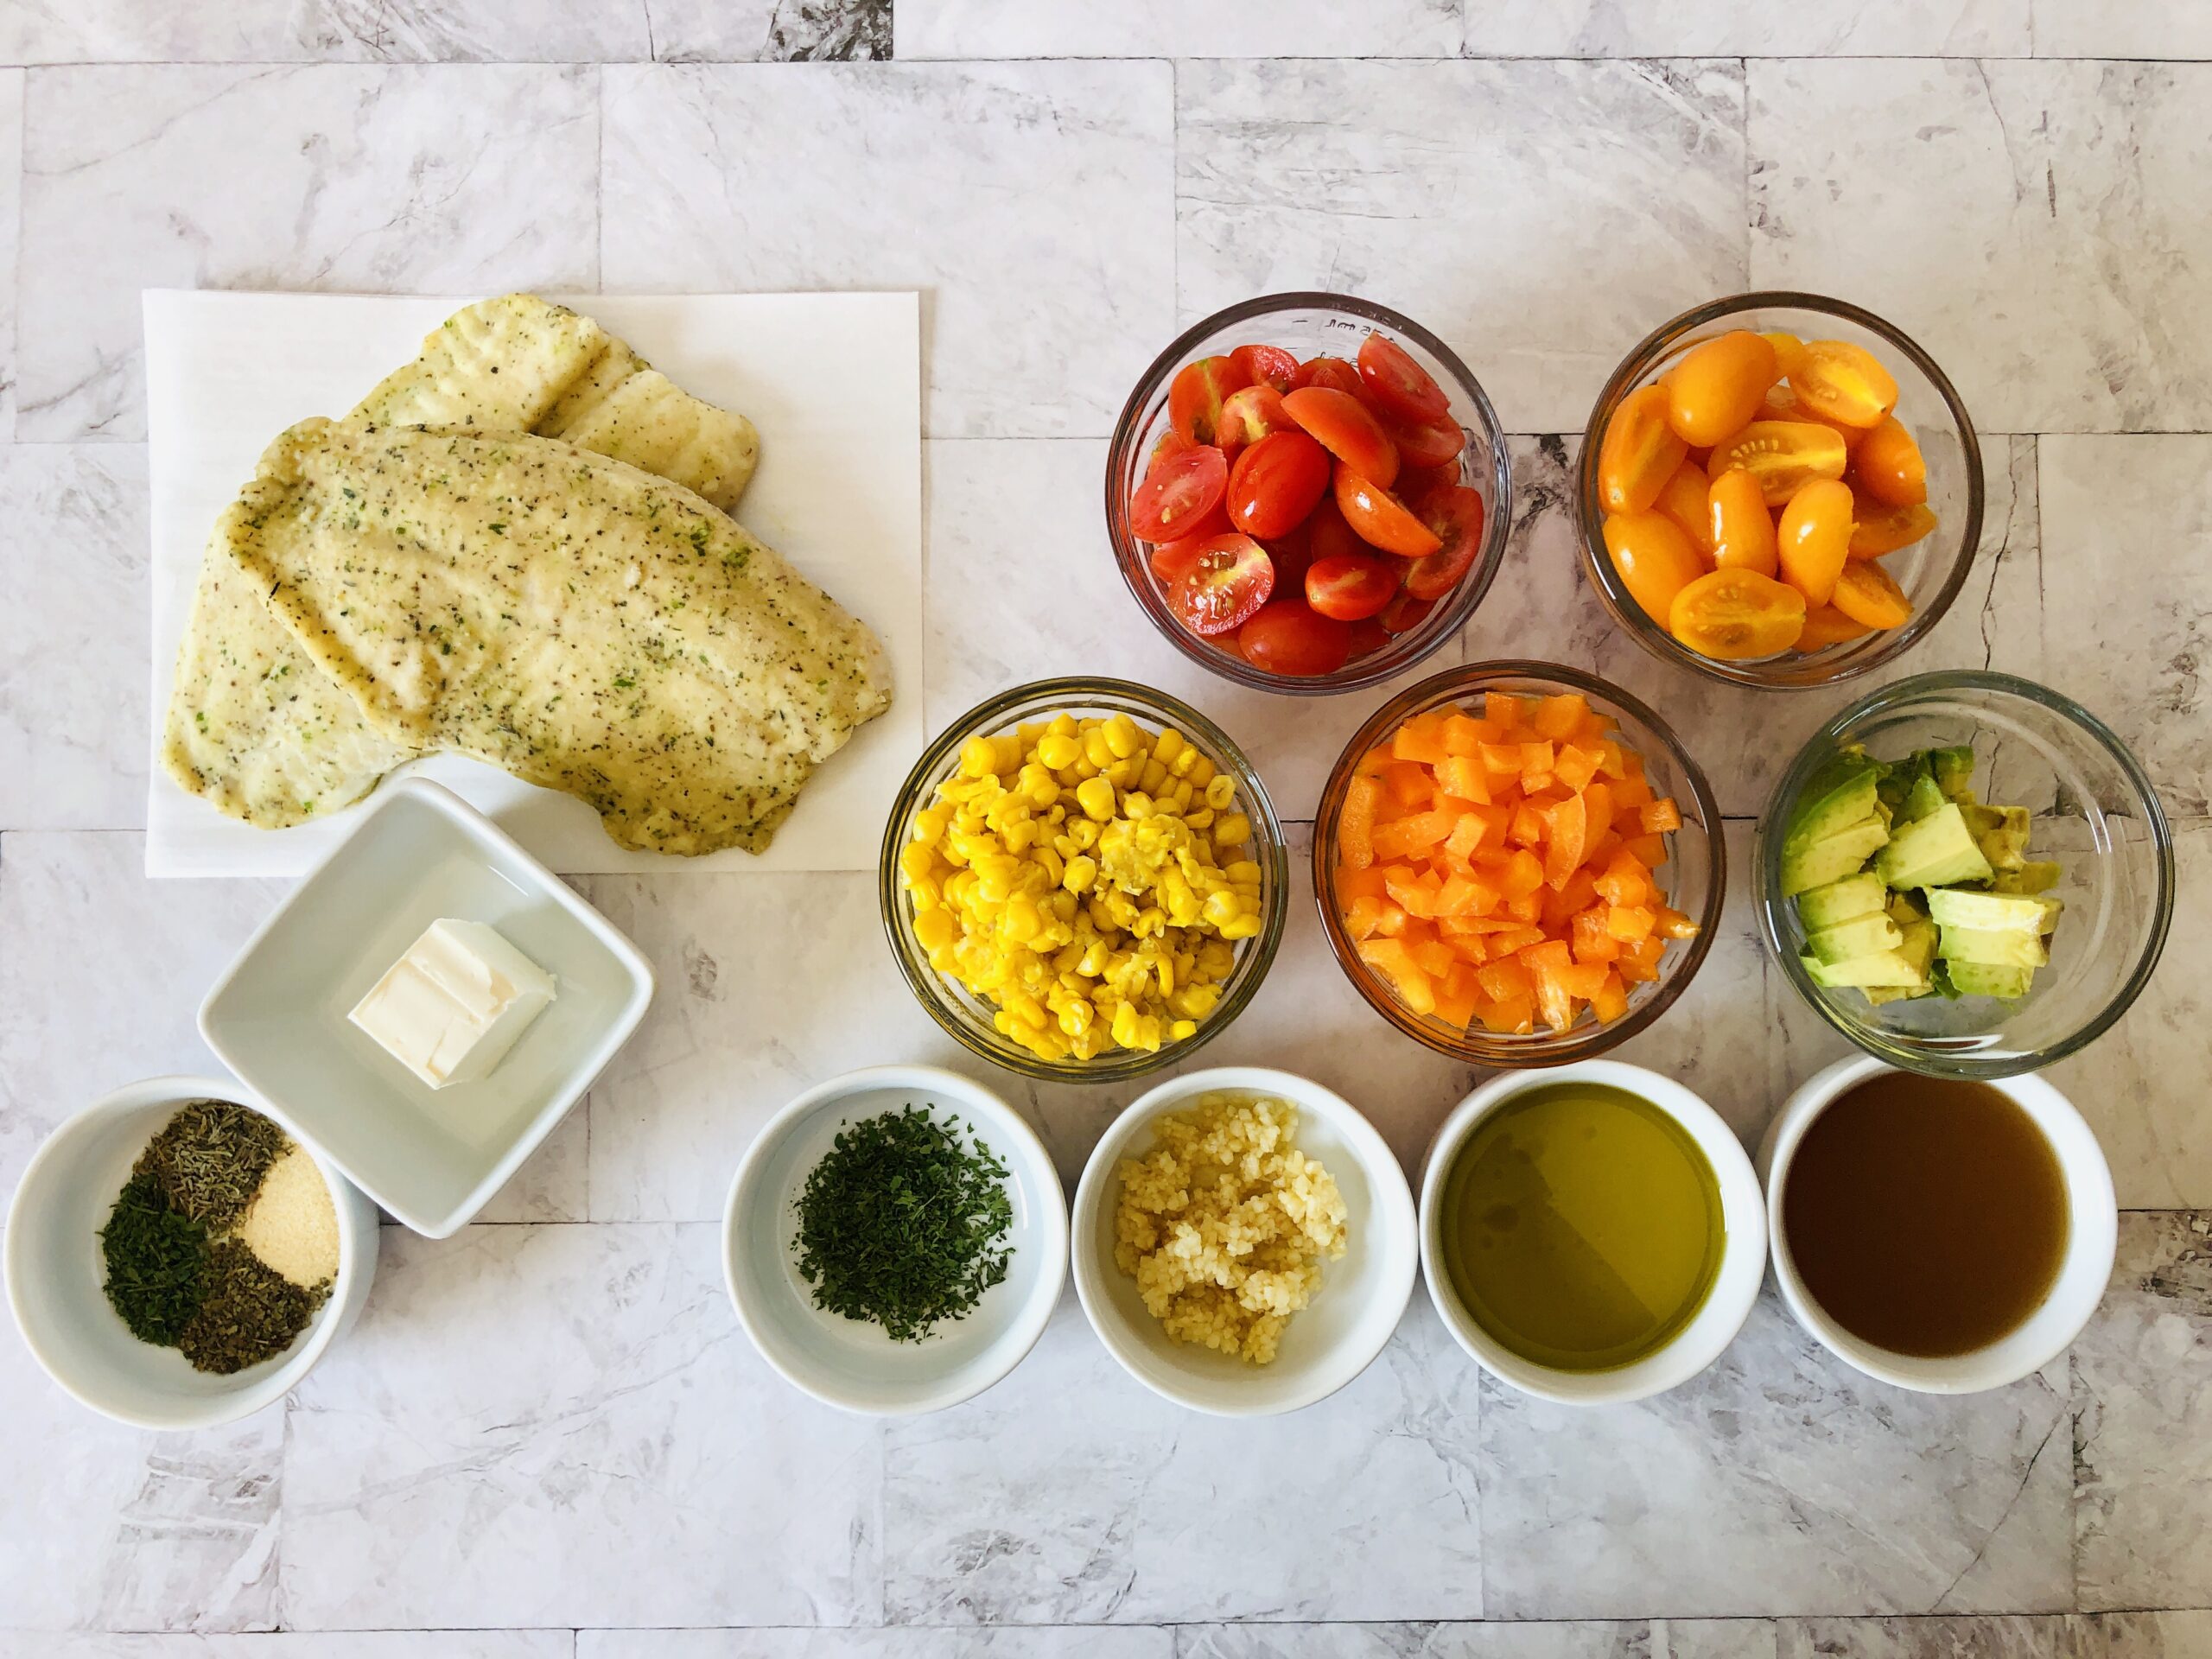 Various fresh ingredients and seasonings for Baked Haddock with Corn Salad are arranged neatly on a marble countertop, ready for cooking.